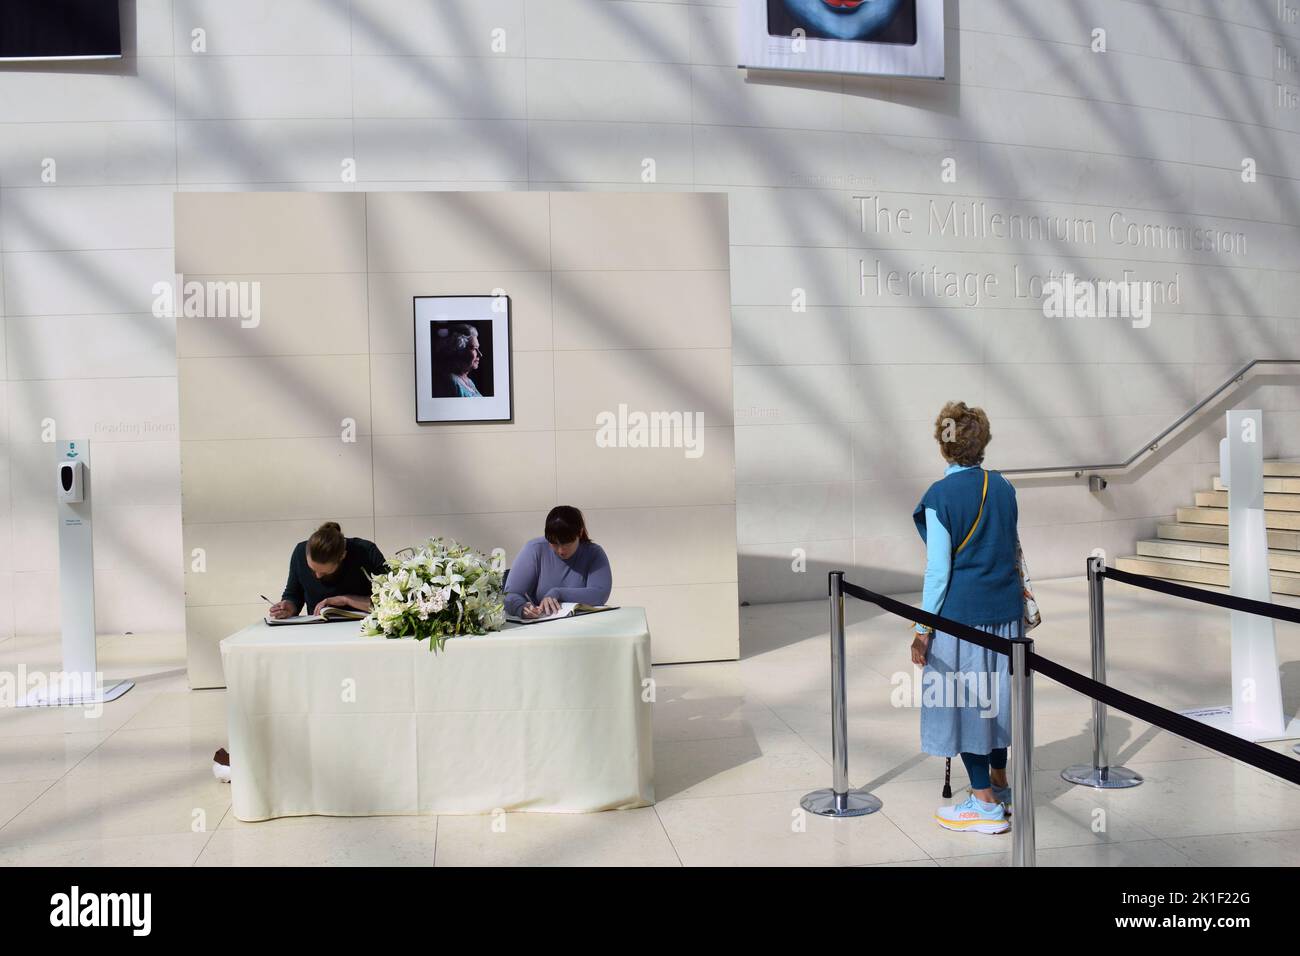 London, UK. 17 September 2022. People signing Queen Elizabeth II book of remembrance at the British Museum. Credit: Liz Somerville/Alamy Live News Stock Photo